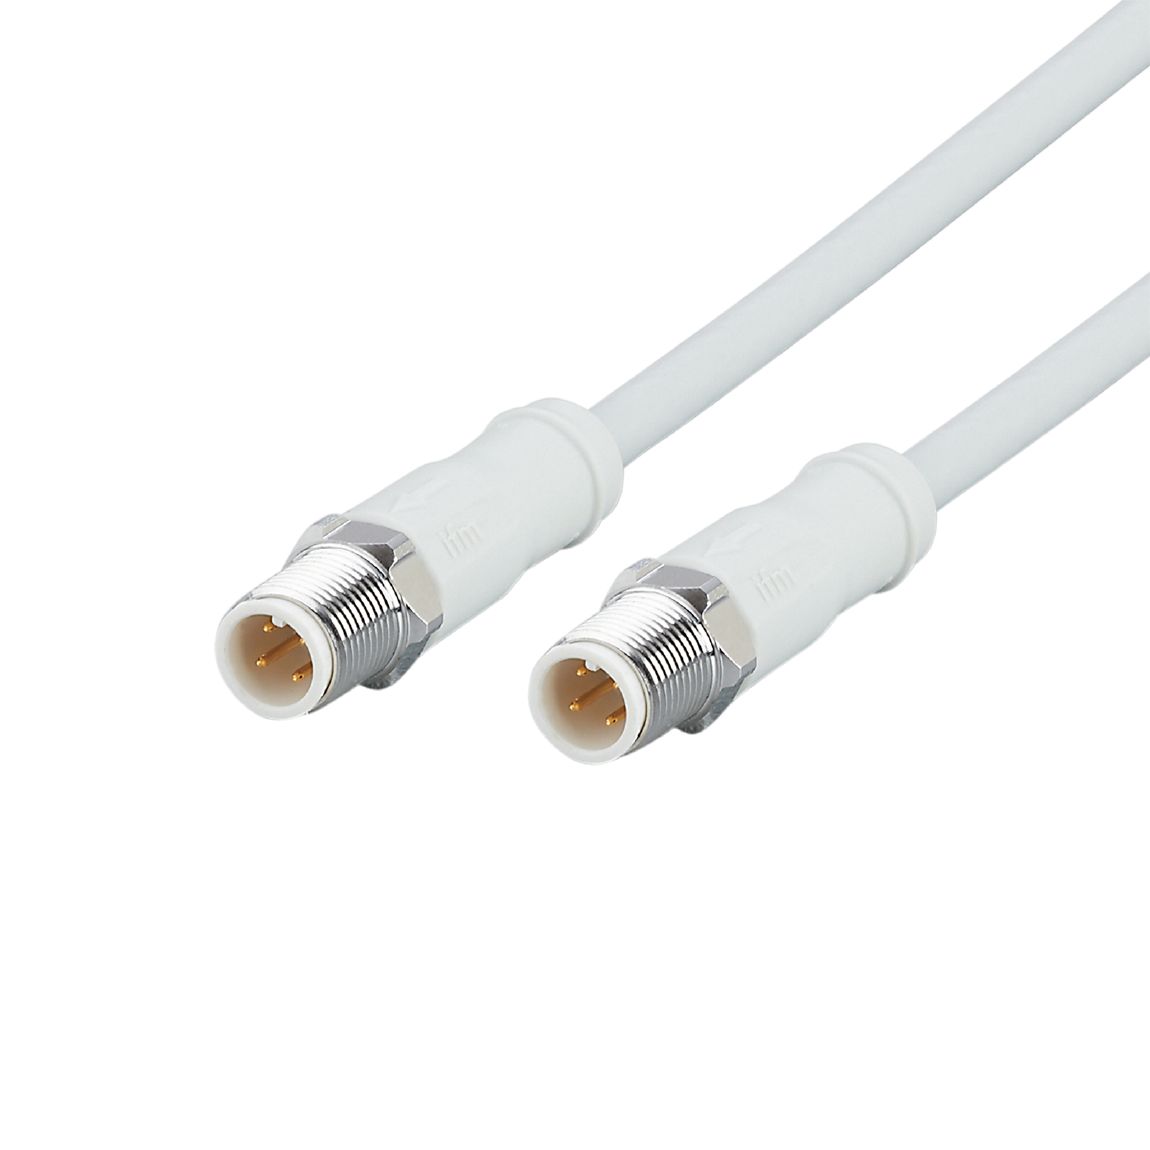 EVF529 - Ethernet connection cable - ifm